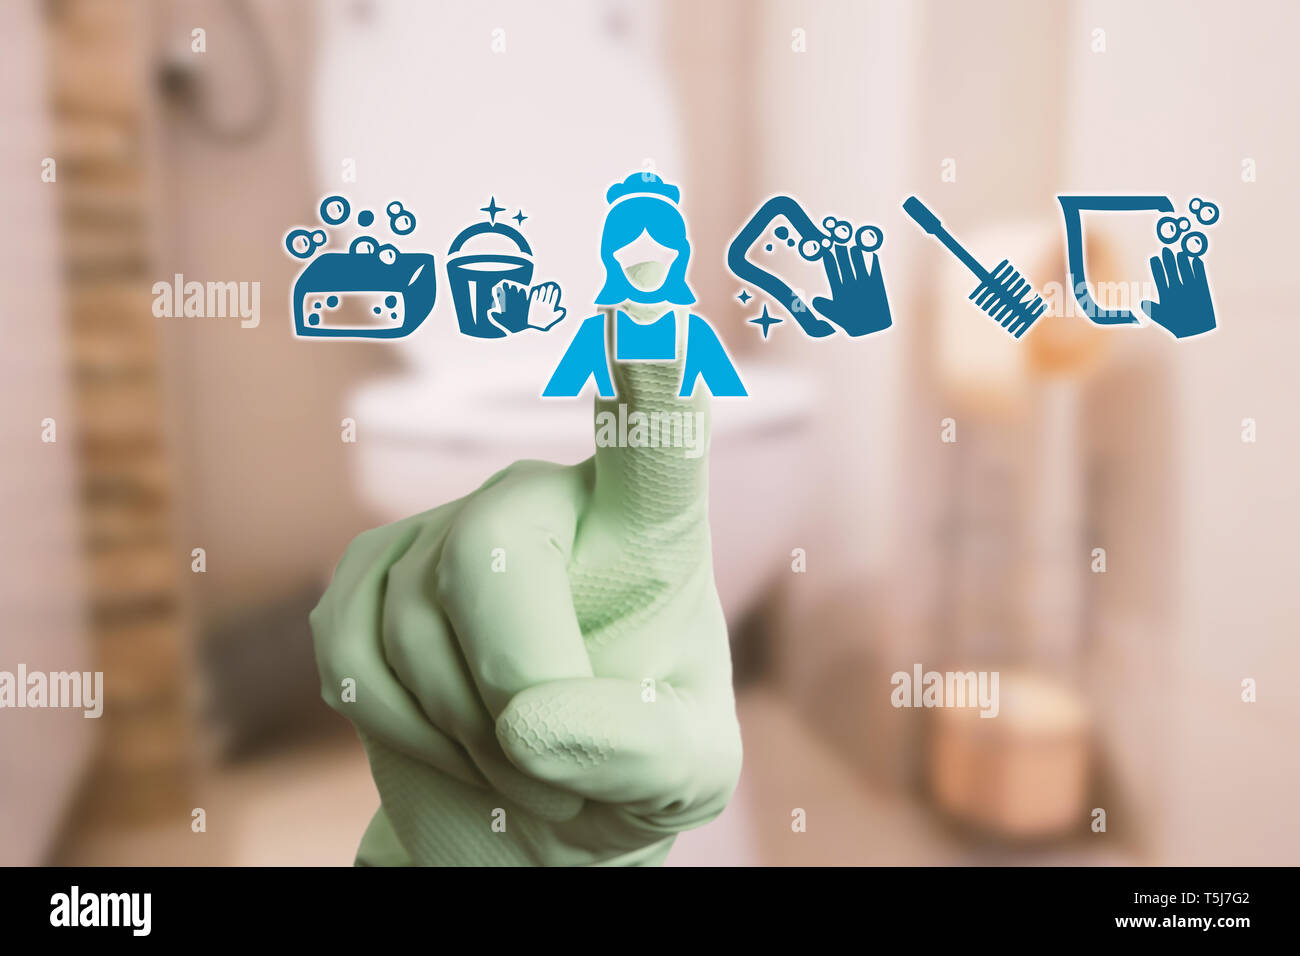 Person touching maid symbol on transparent display wearing sanitary gloves as housework and chores concept Stock Photo